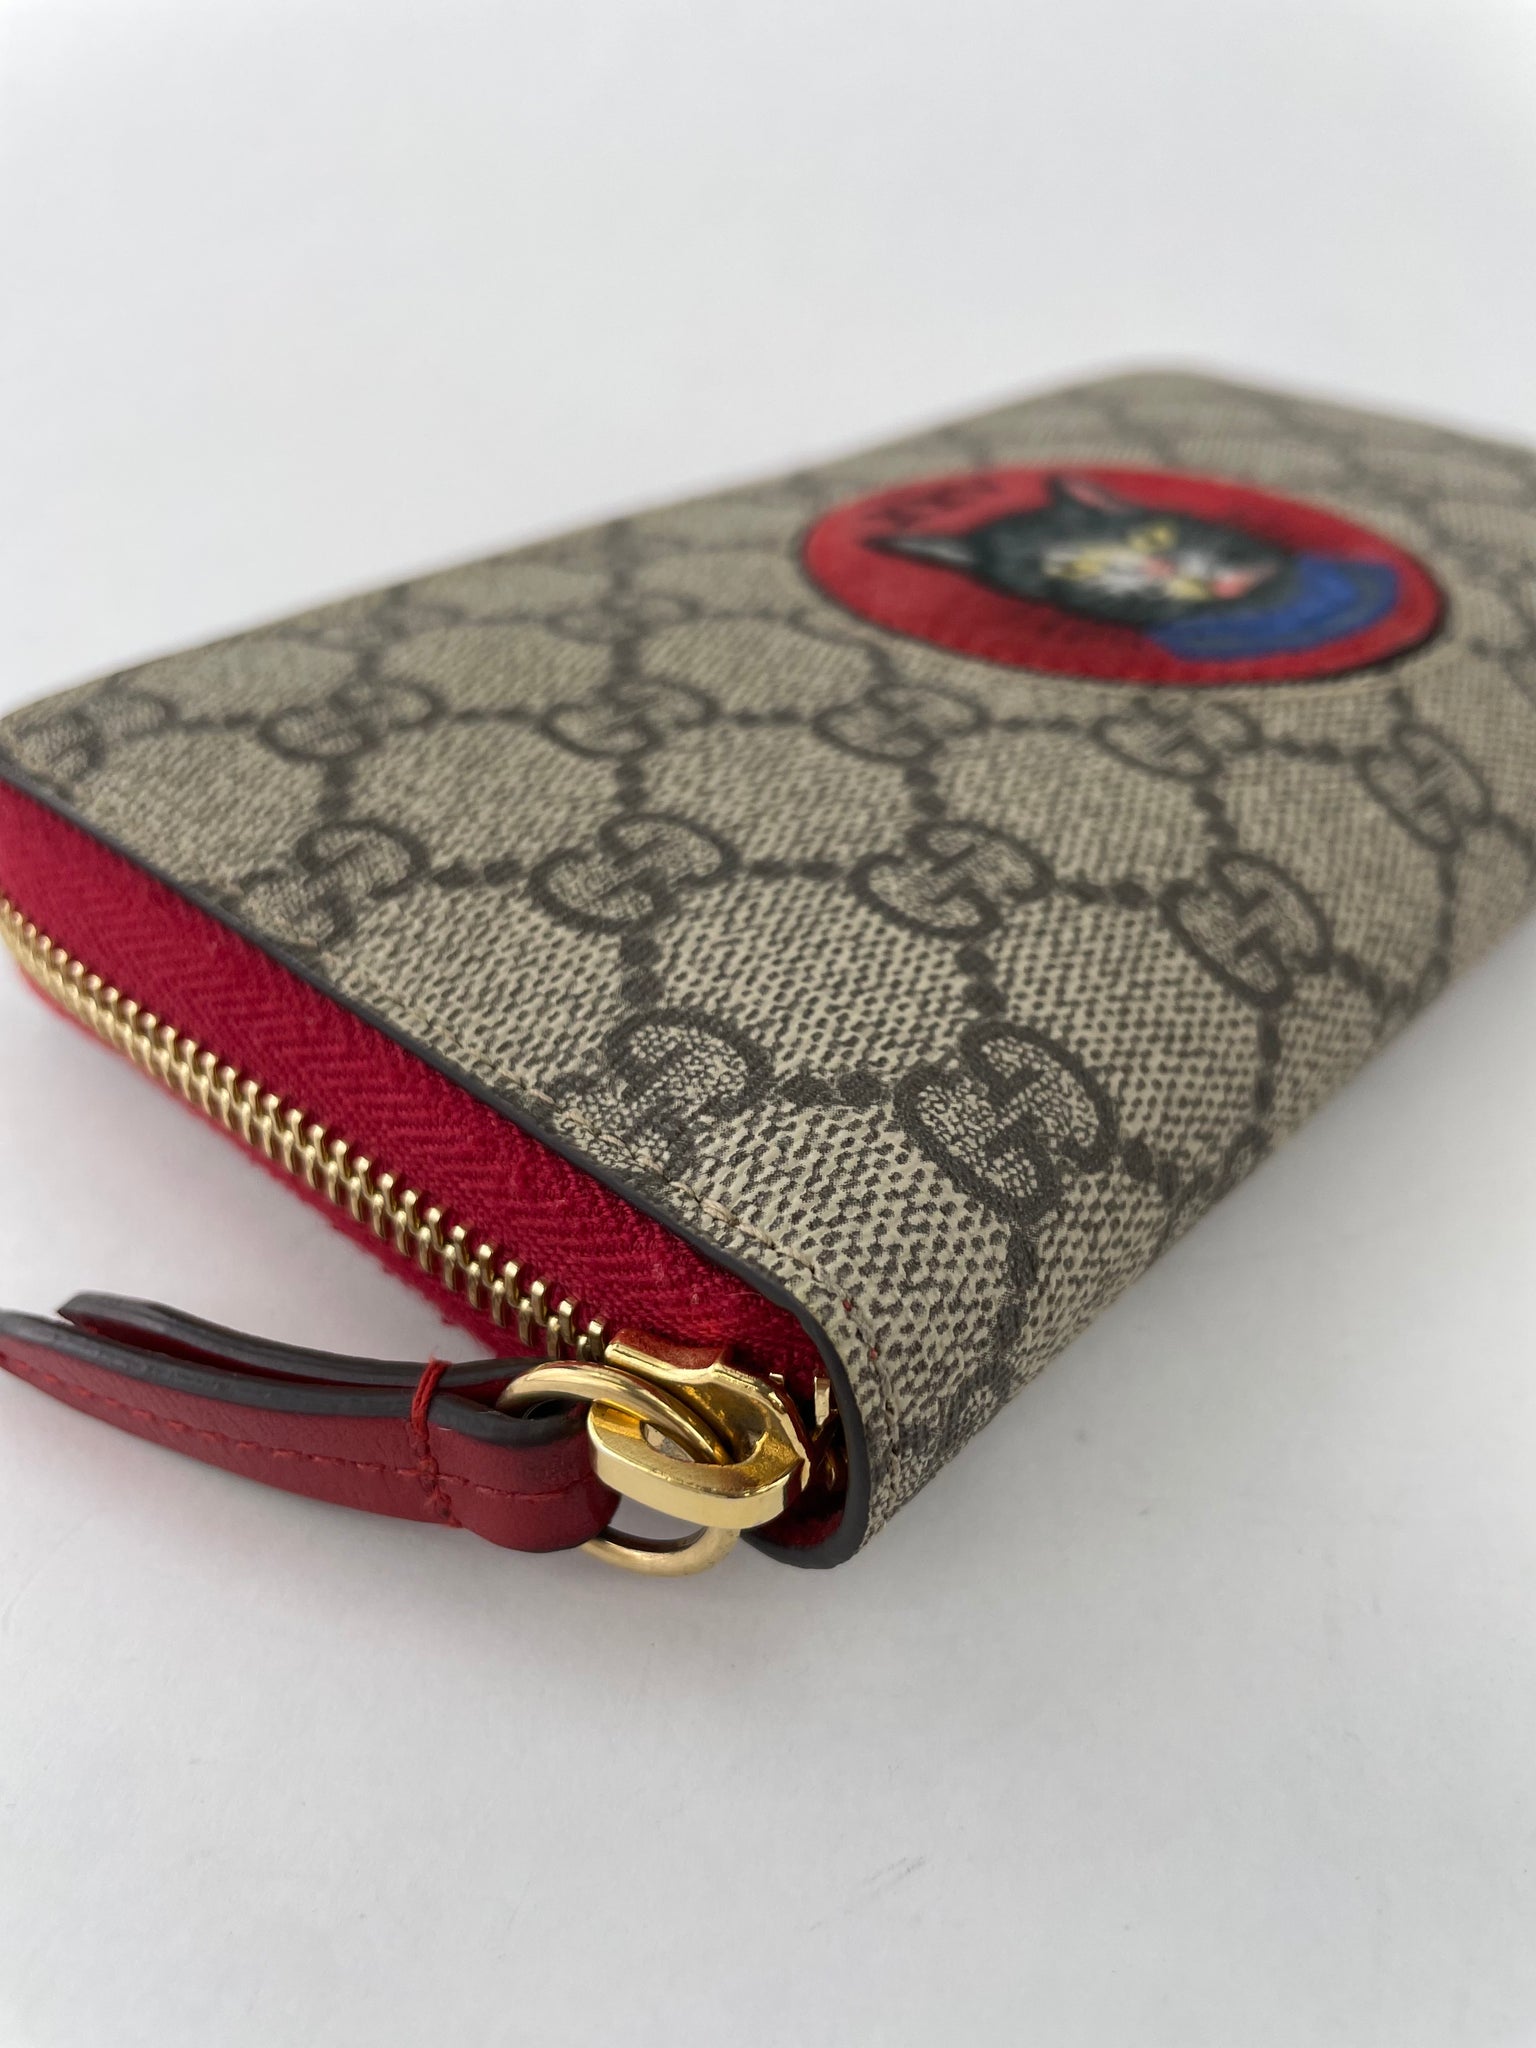 Gucci Beige/Red GG Supreme Limited Edition Bosco Patch Zip Around Wallet  Gucci